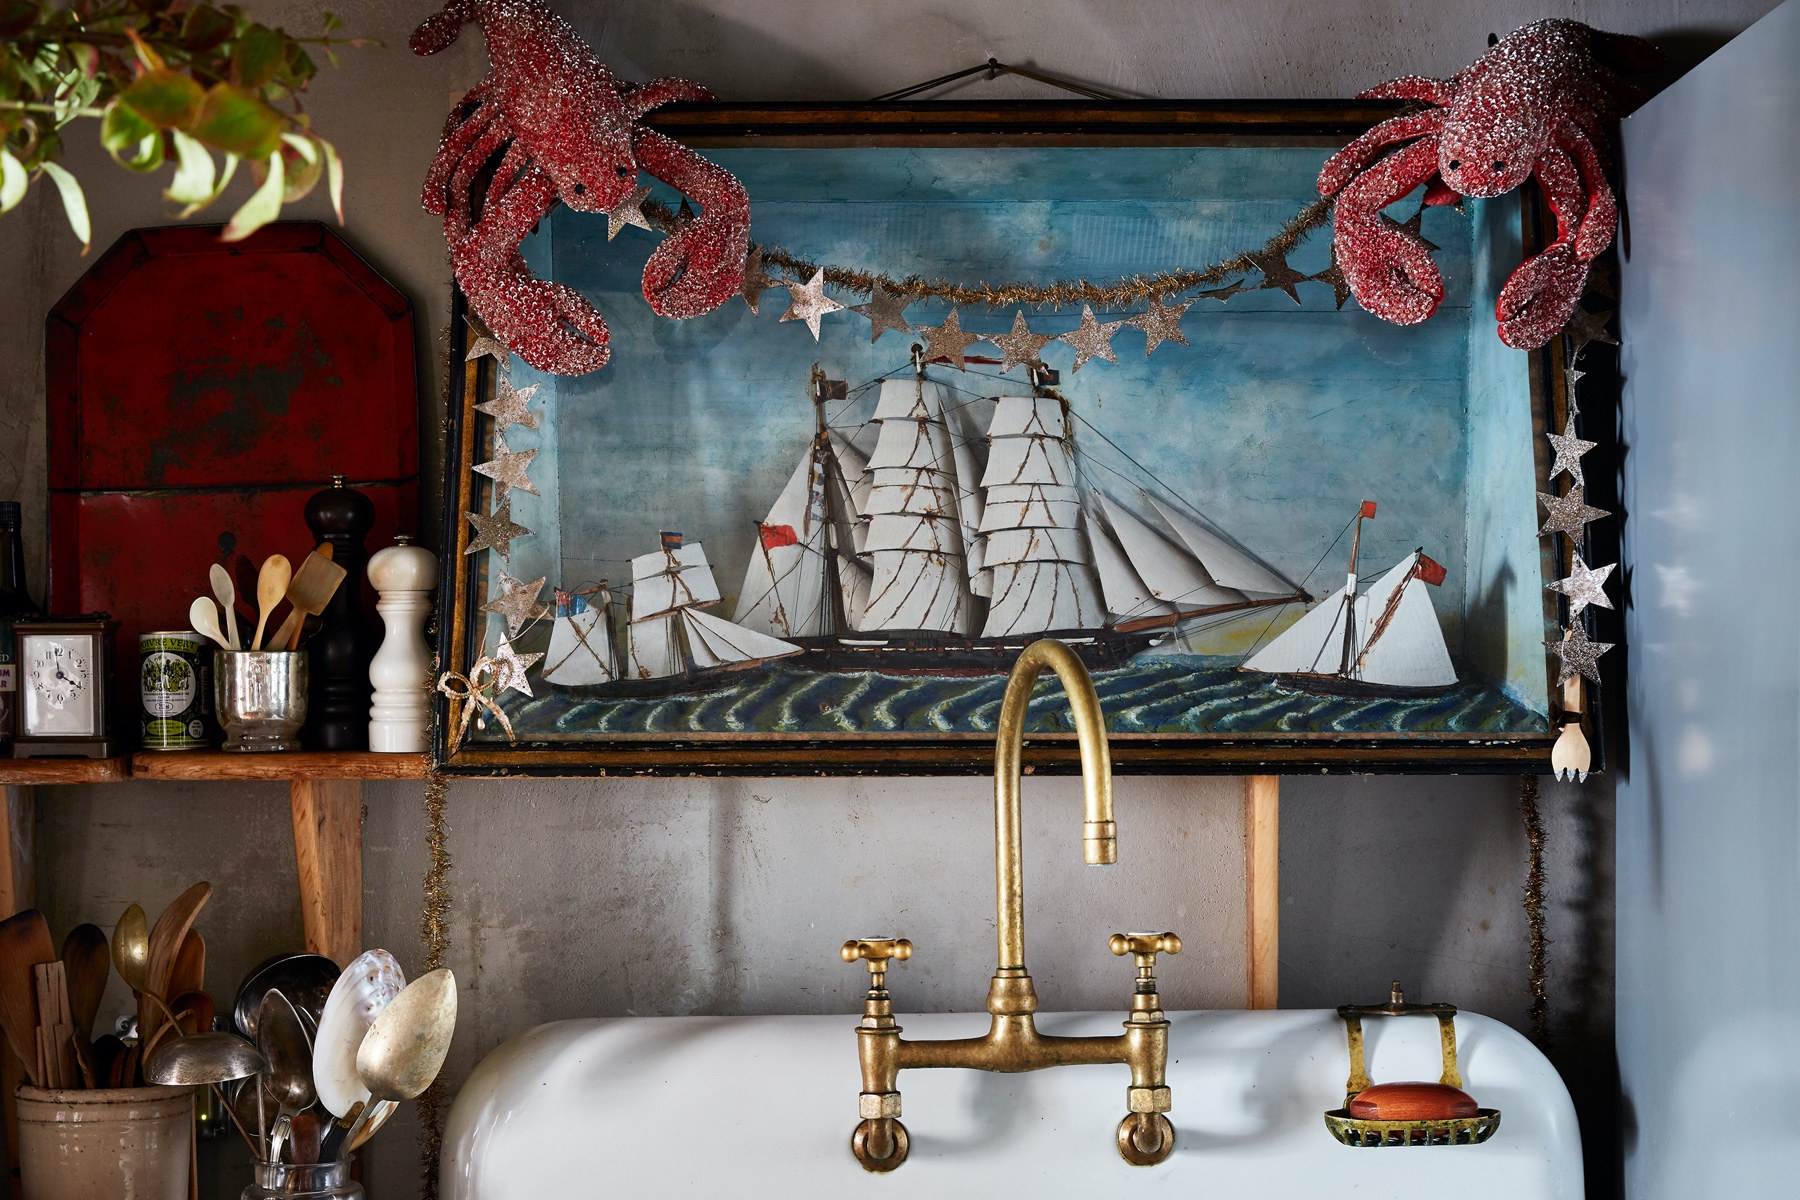 John Derian’s sink decorated for the holidays with glittery lobsters and navel artwork.